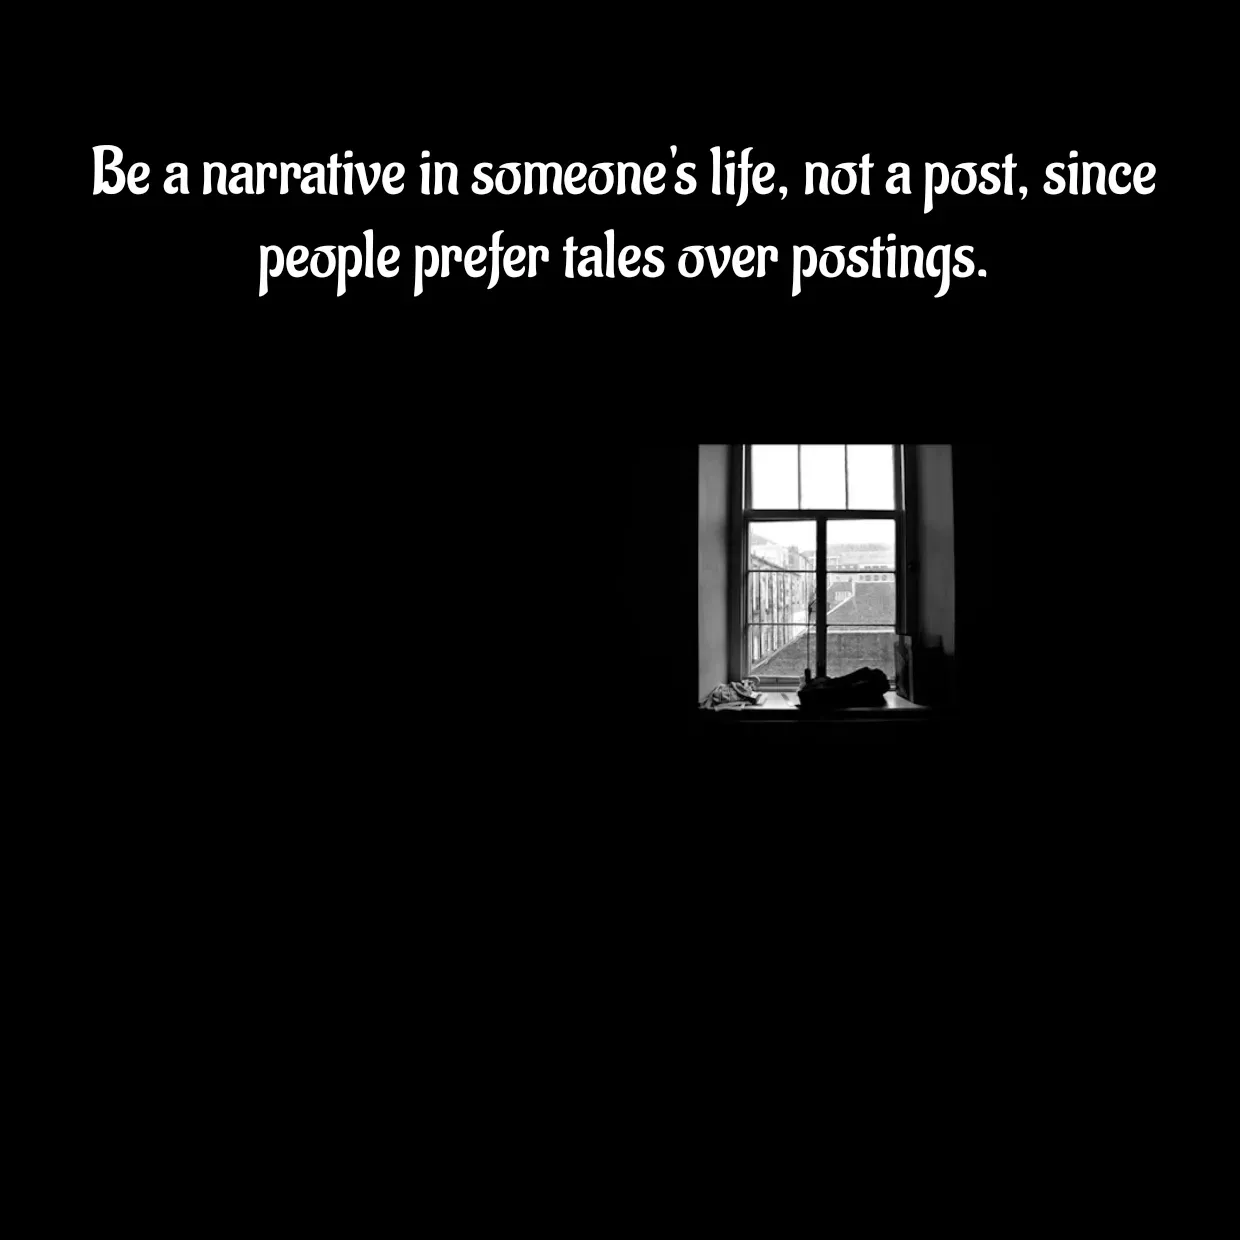 Quote by Peace finder - Be a narrative in someone's life, not a post, since people prefer tales over postings. - Made using Quotes Creator App, Post Maker App